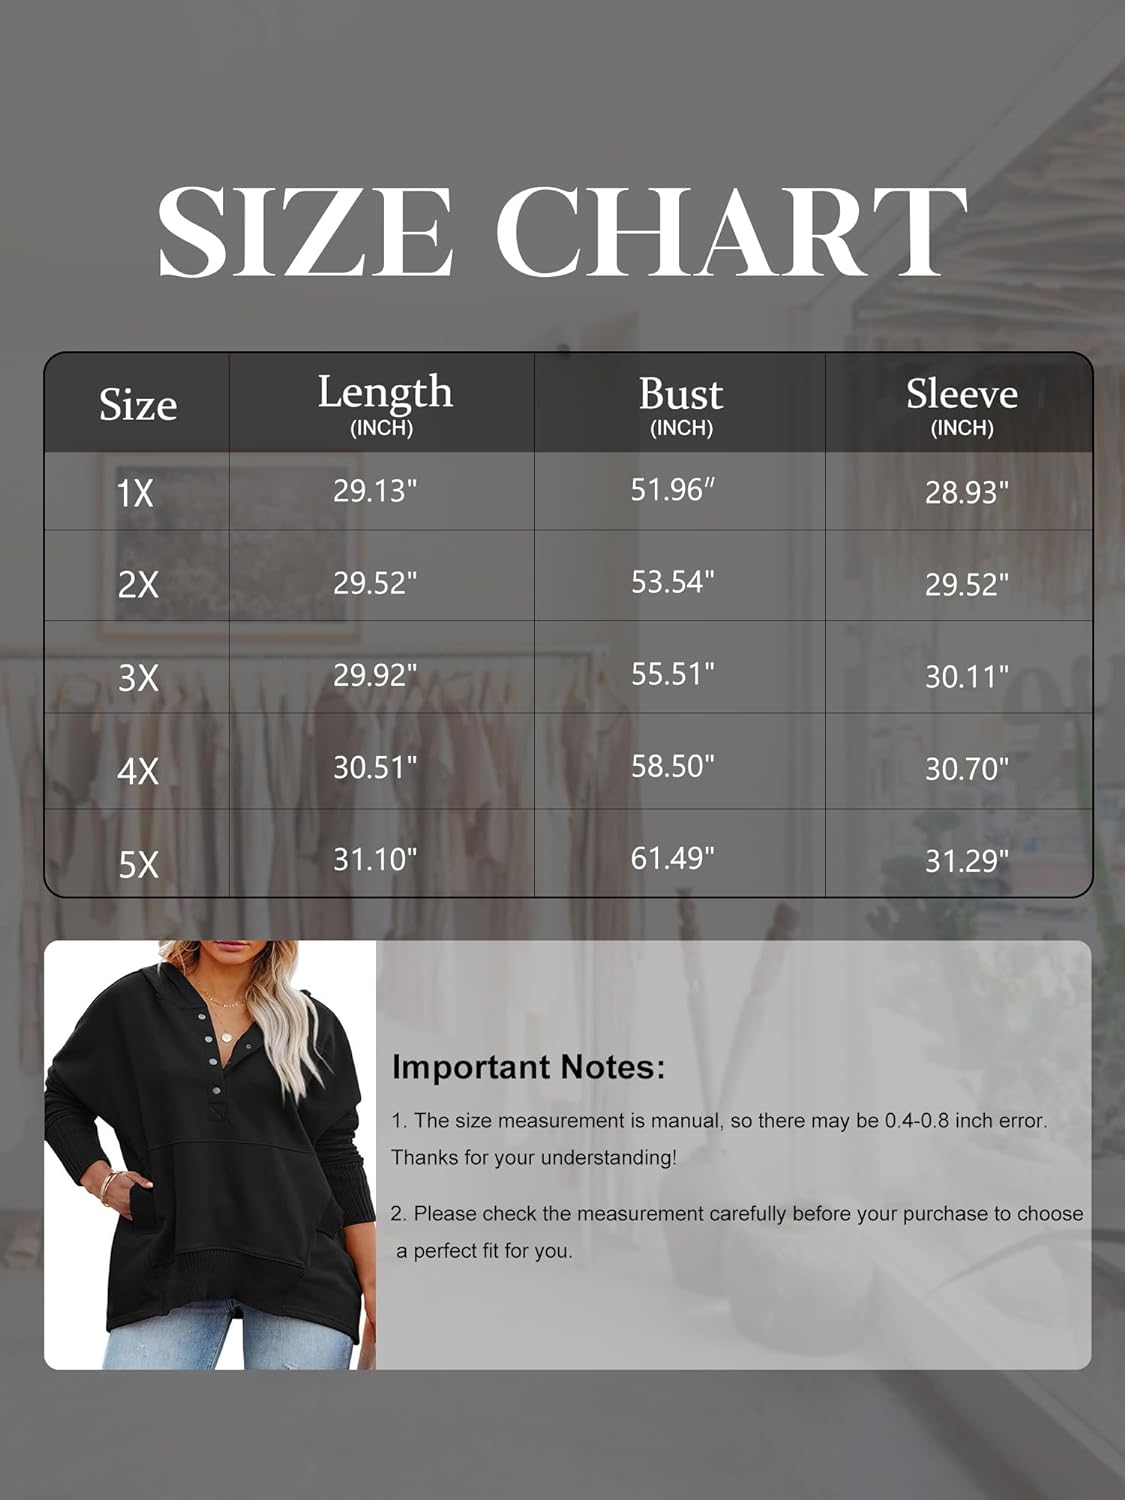 HDLTE Plus Size Faith Shirts Women Long Sleeve Graphic Tops Tees Christian Sweatshirts: A Review